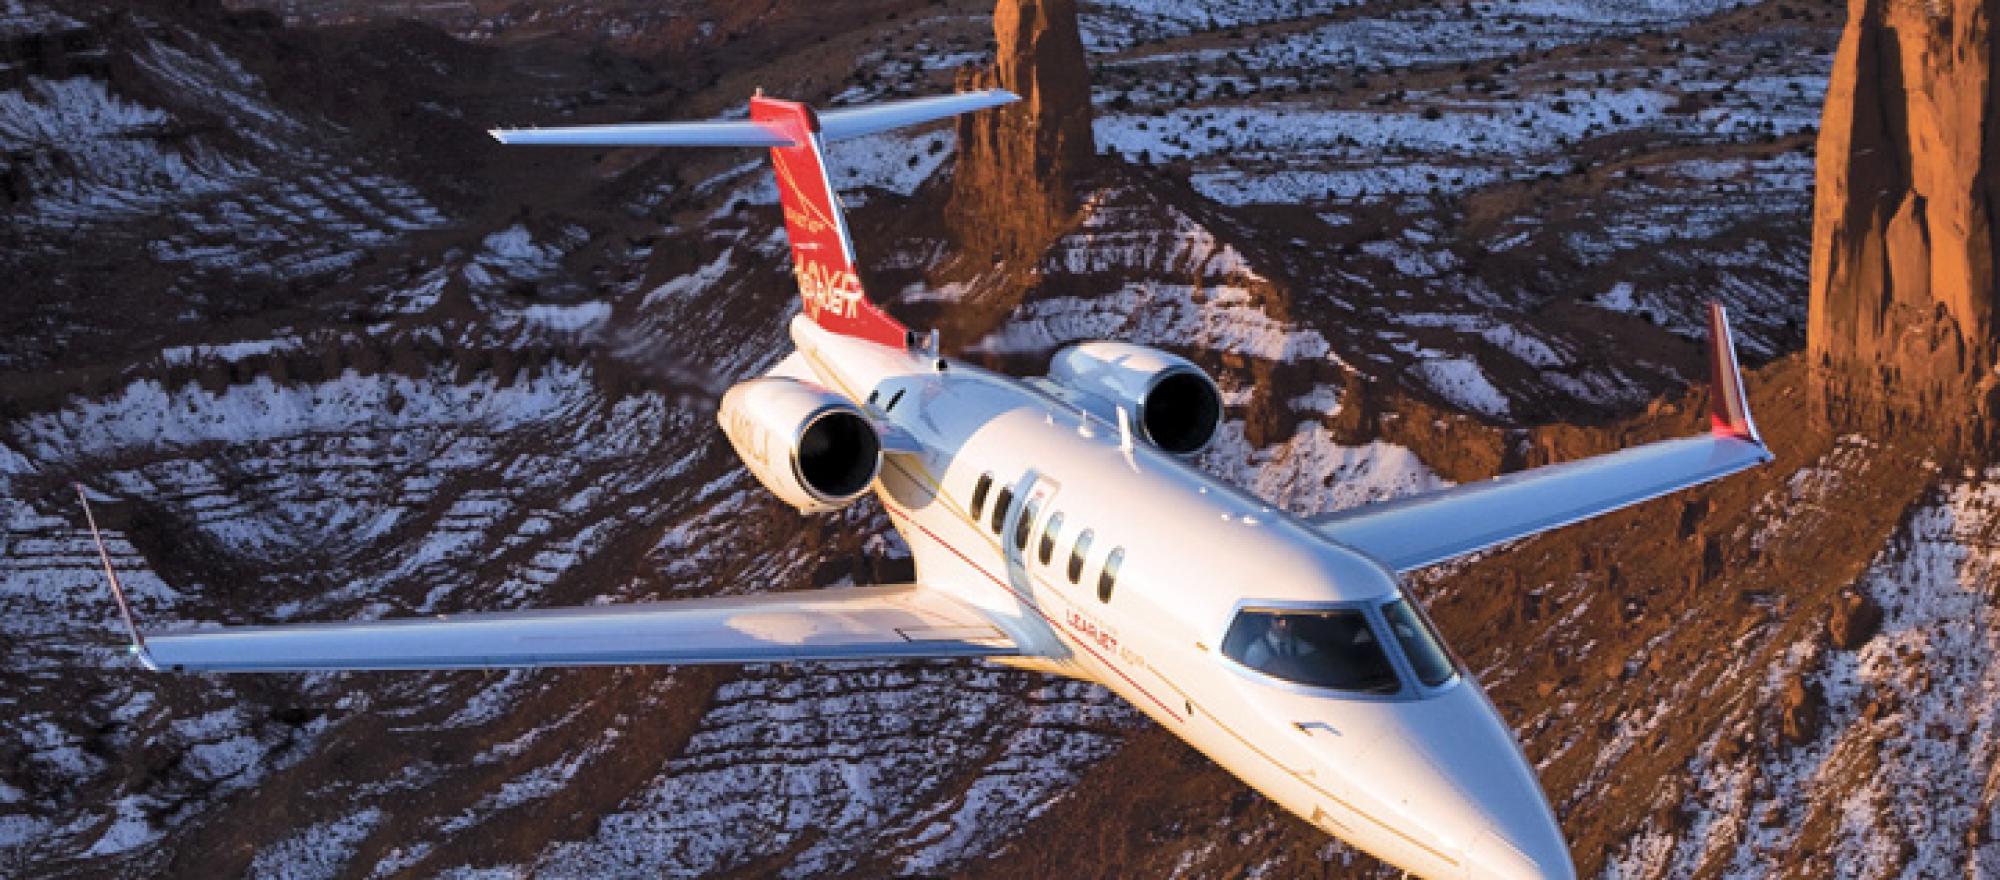 “Customers love the airplane,” said one operator of the Learjet 40XR. “It has